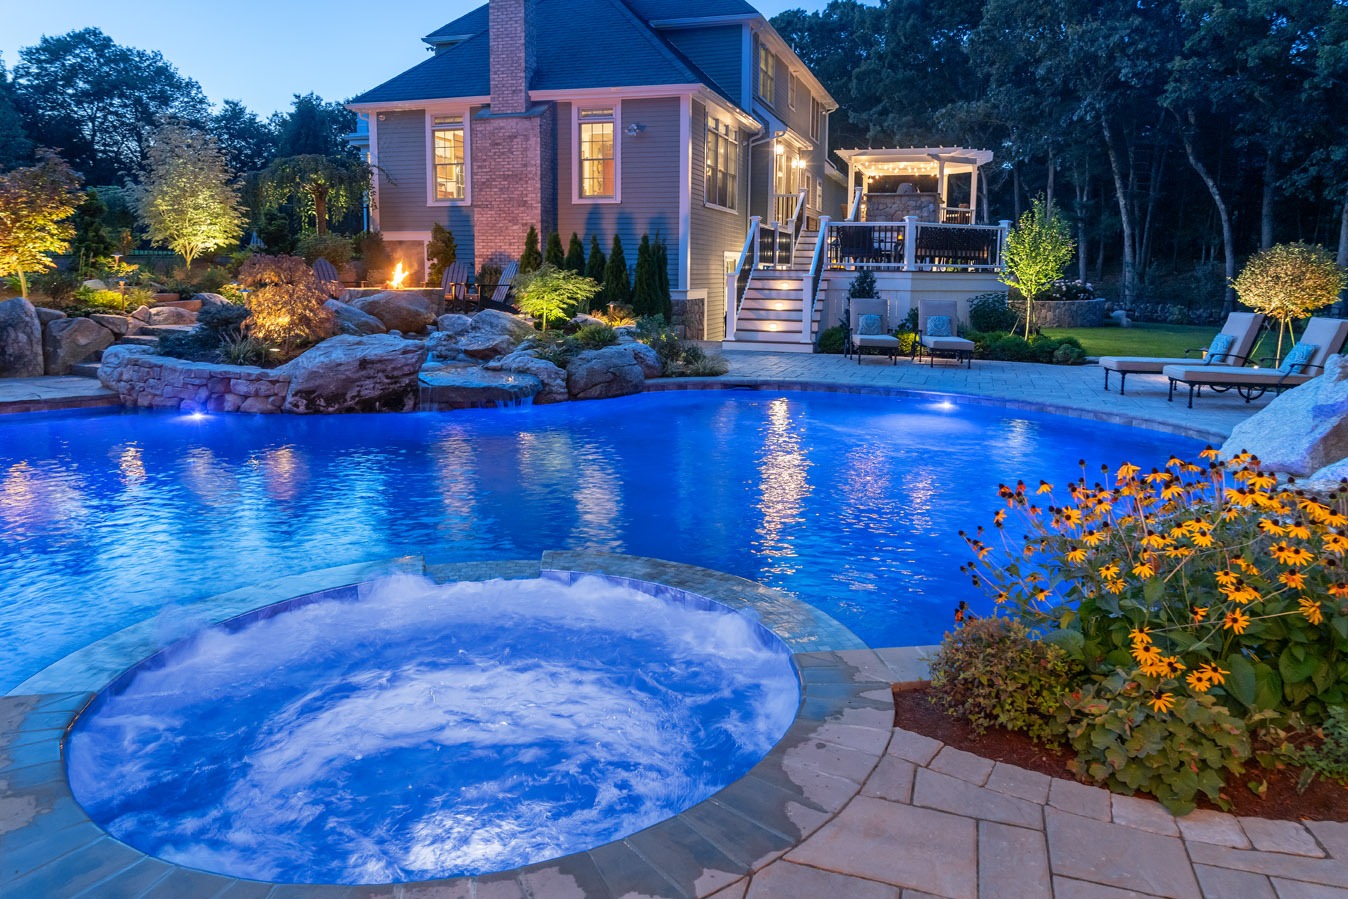 Luxurious backyard with illuminated inground pool and jacuzzi at dusk. Warm lighting accentuates a cozy patio, vibrant flowers, and a fire pit.